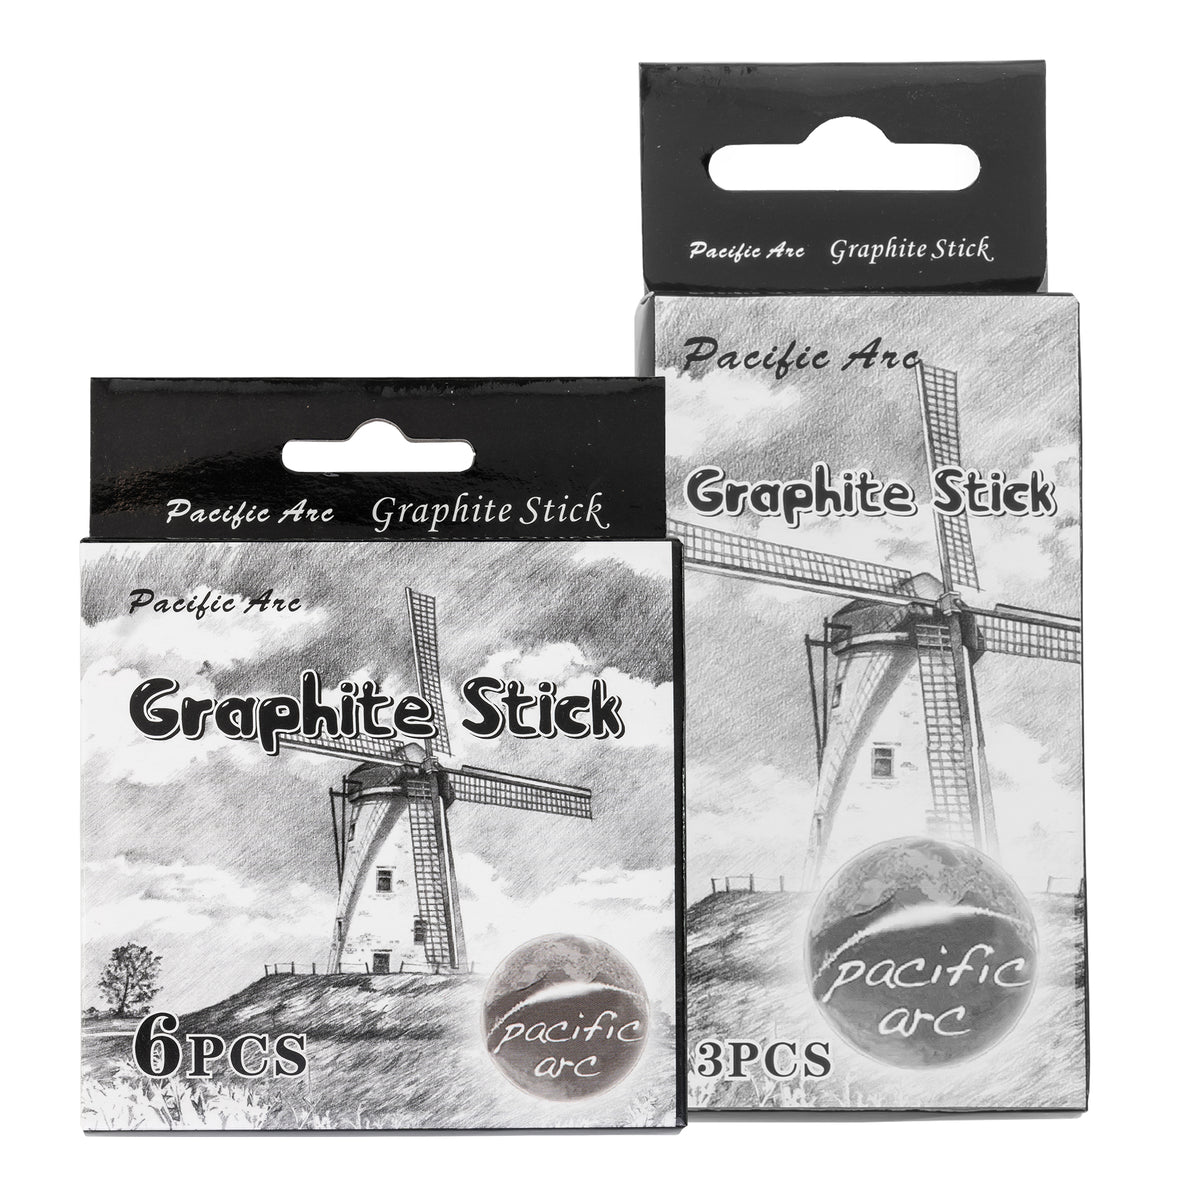 Pacific Arc Large Vine Charcoal Stick 5/Pkg, Soft, Black, Thick Willow  Charcoal for Sketching and Drawing